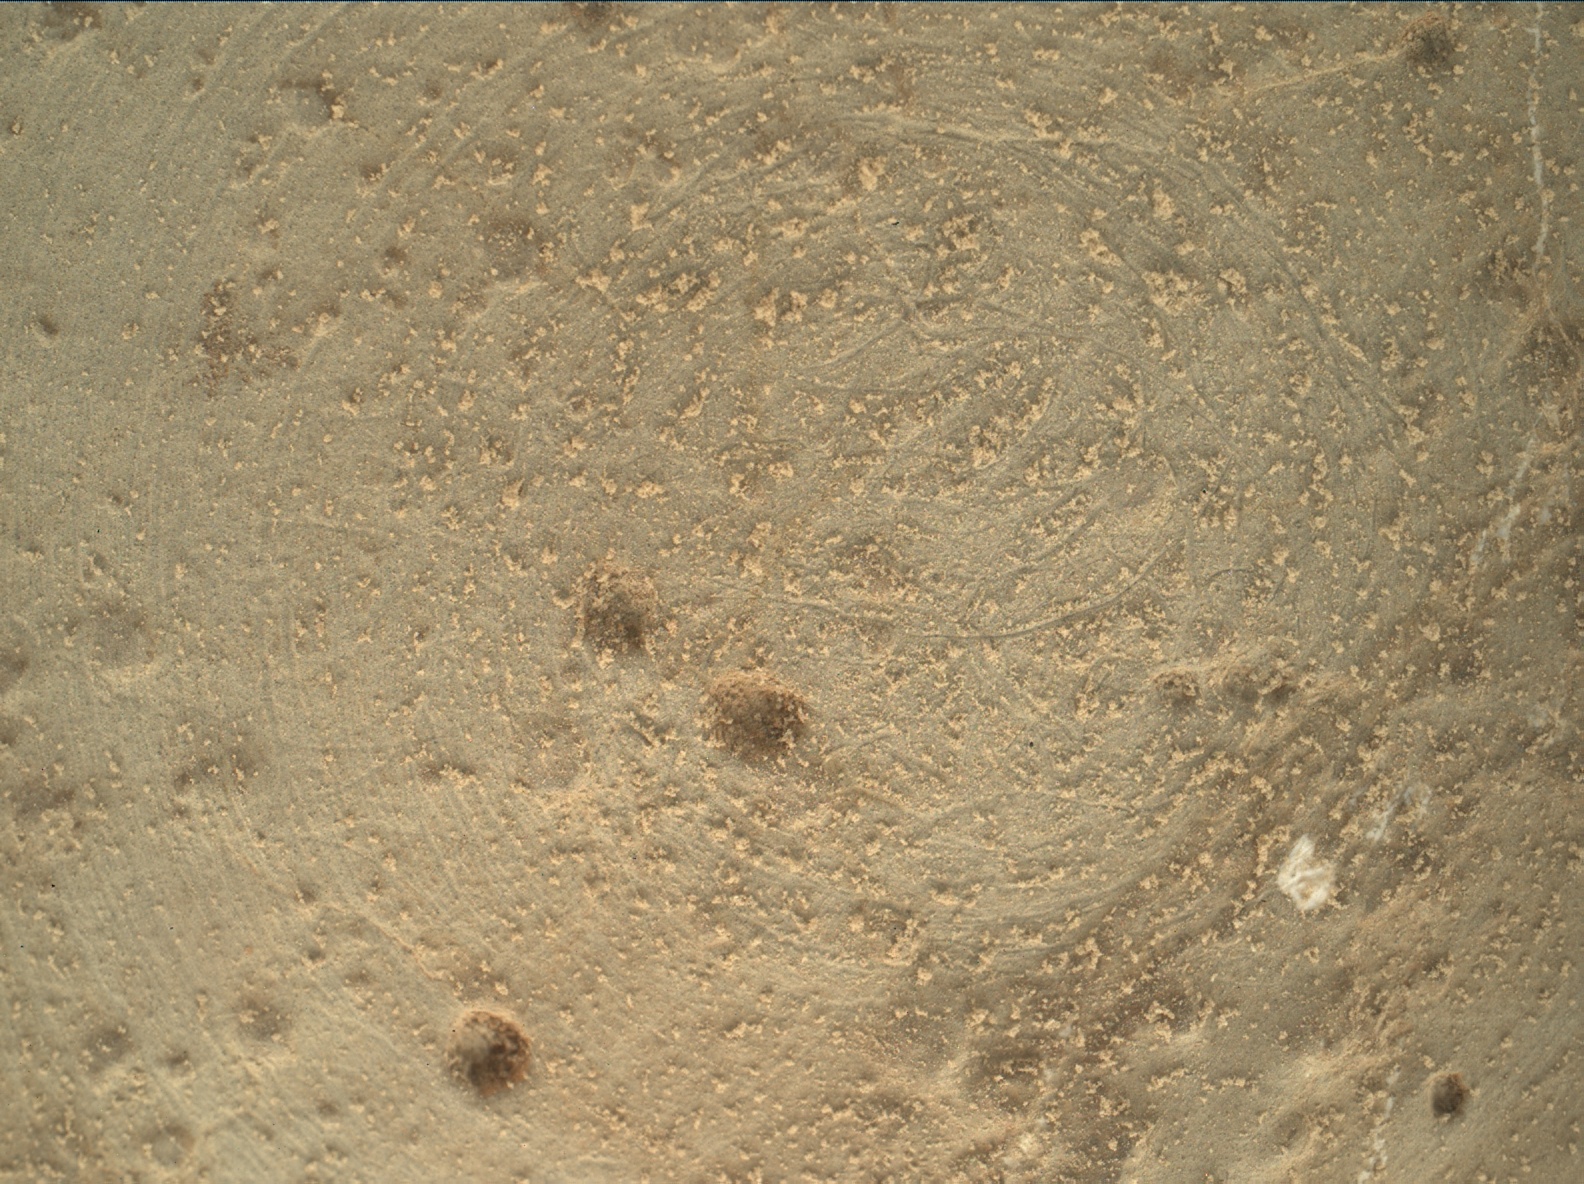 Nasa's Mars rover Curiosity acquired this image using its Mars Hand Lens Imager (MAHLI) on Sol 169